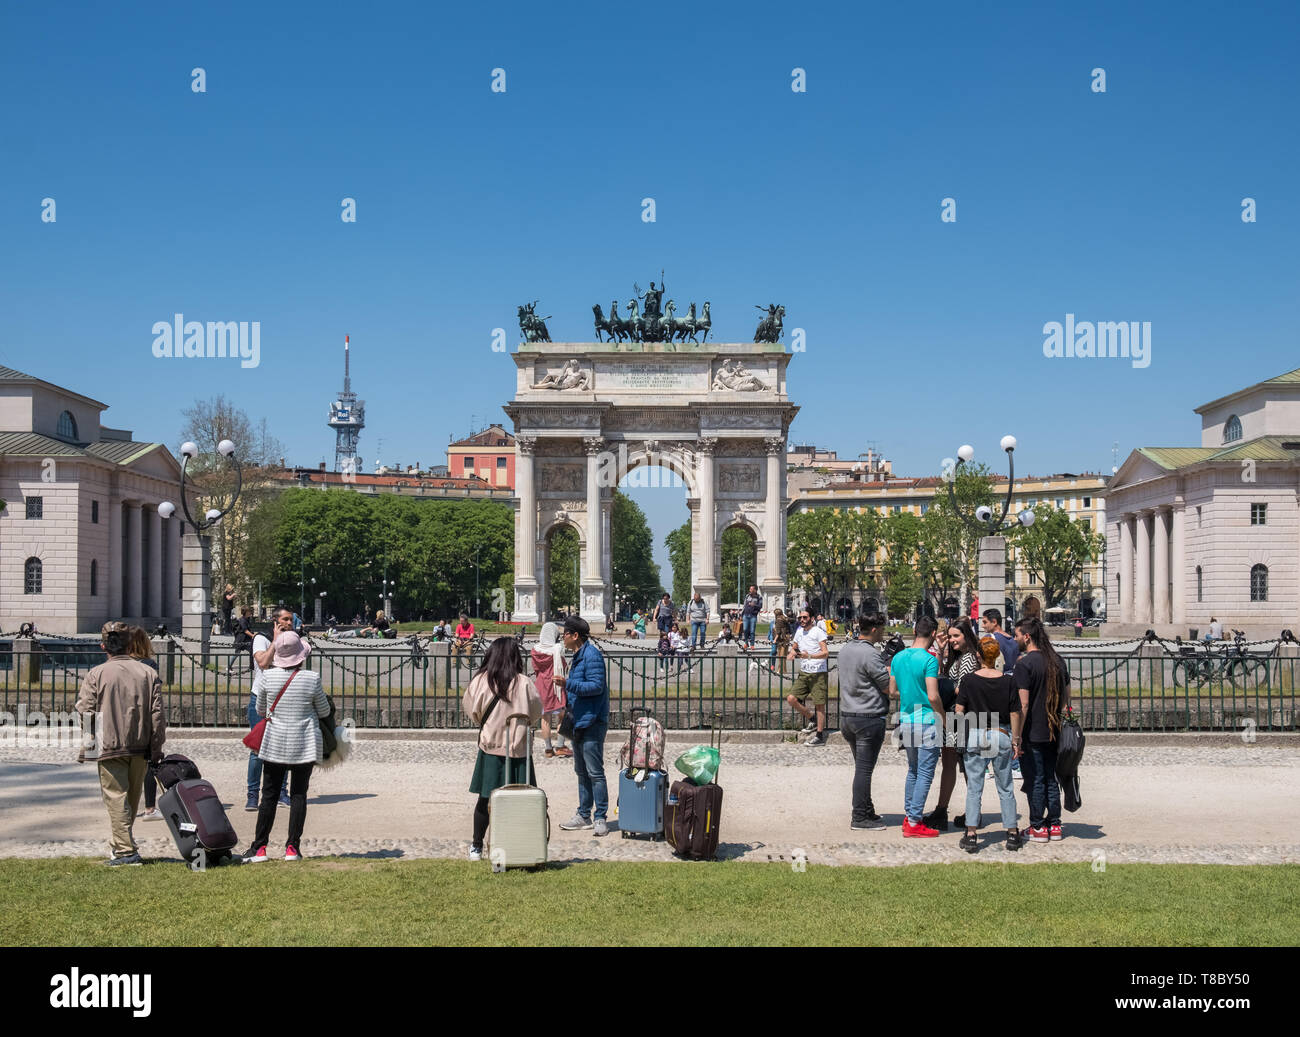 Arco Della Pace (Arch of Peace), Piazza Sempione, Milan, Italy, a triumphal arch and one of Milan's oldest city gates. Stock Photo